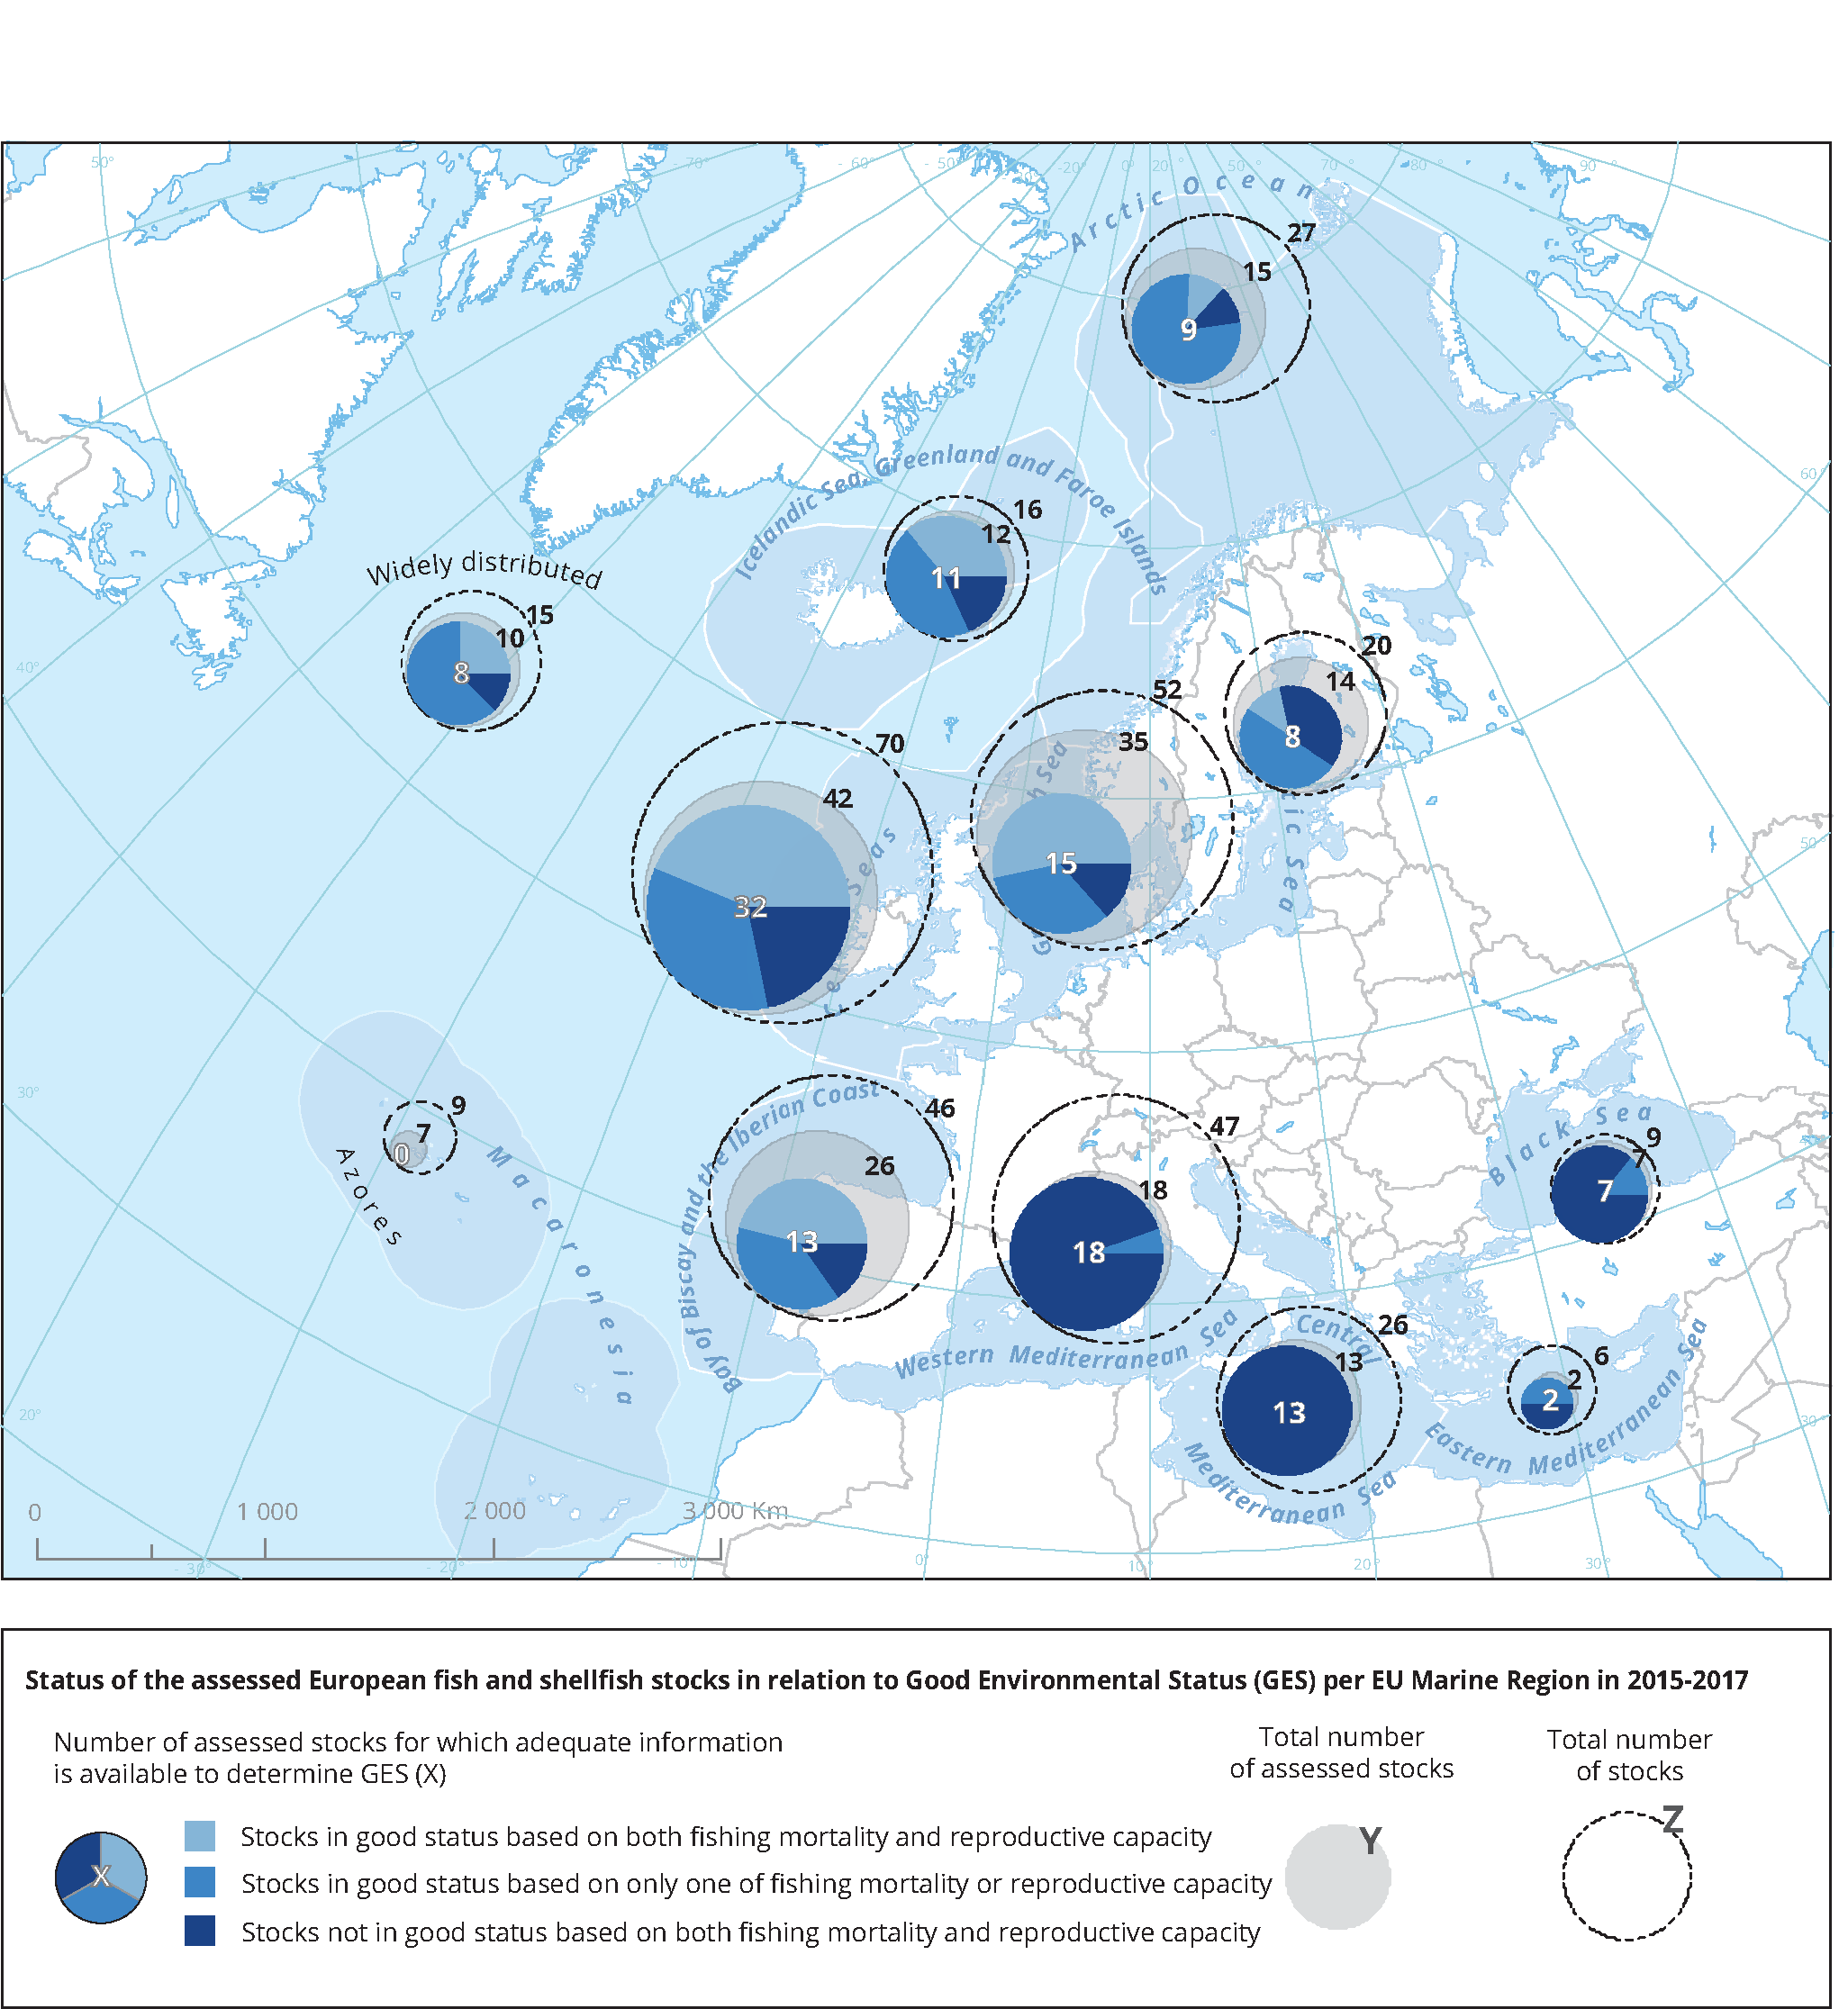 Status of the assessed European commercial fish and shellfish stocks in relation to Good Environmental Status (GES) per EU marine region in 2015-2017